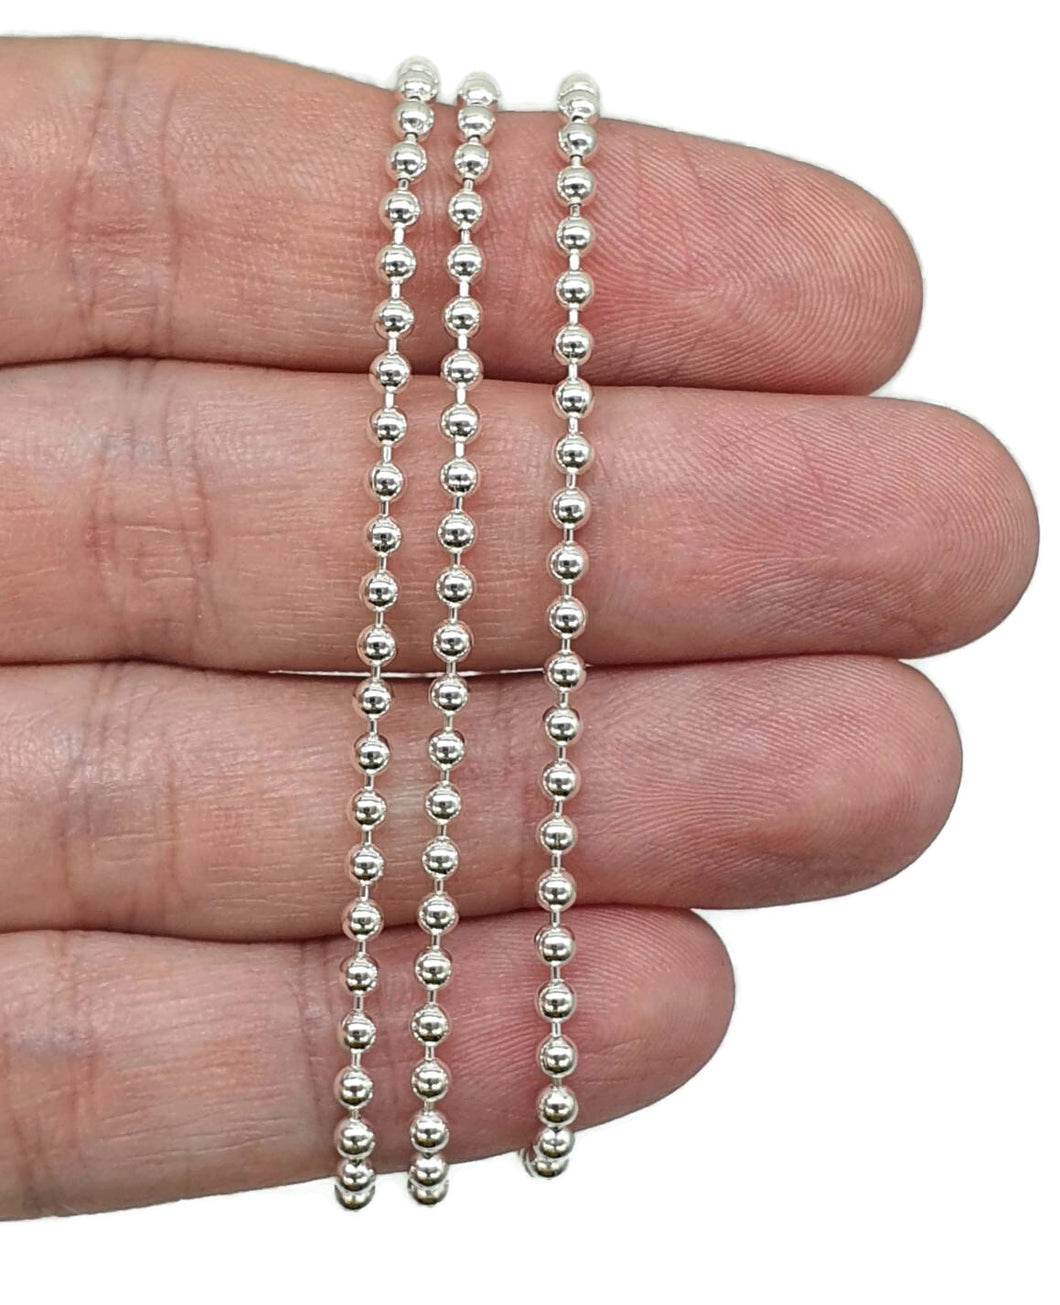 Sterling Silver Chain, 50 cm, 19 inches, Beaded Chain - GemzAustralia 